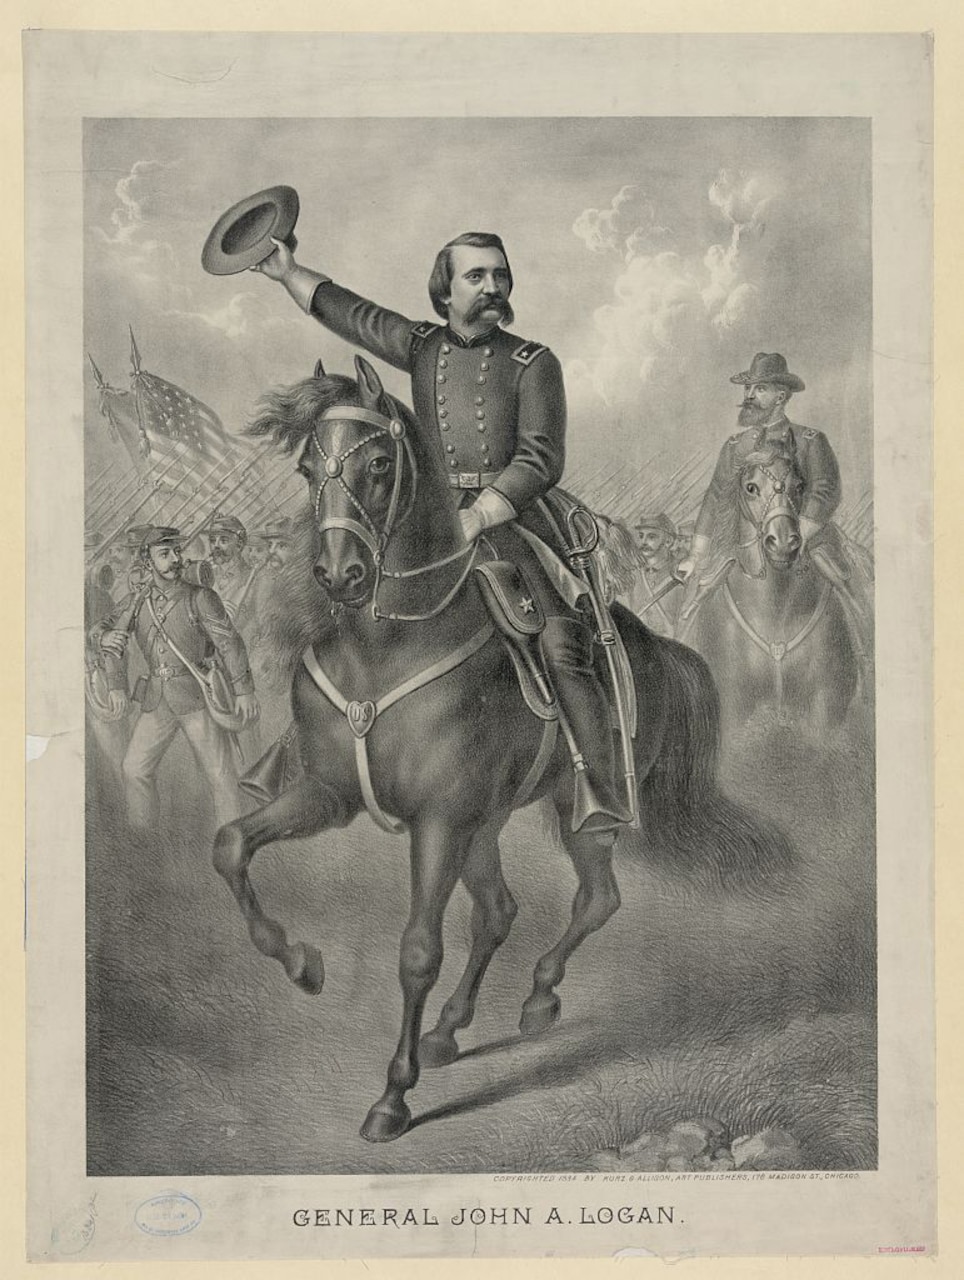 A drawing shows a general on a horse holding his hat above his head.